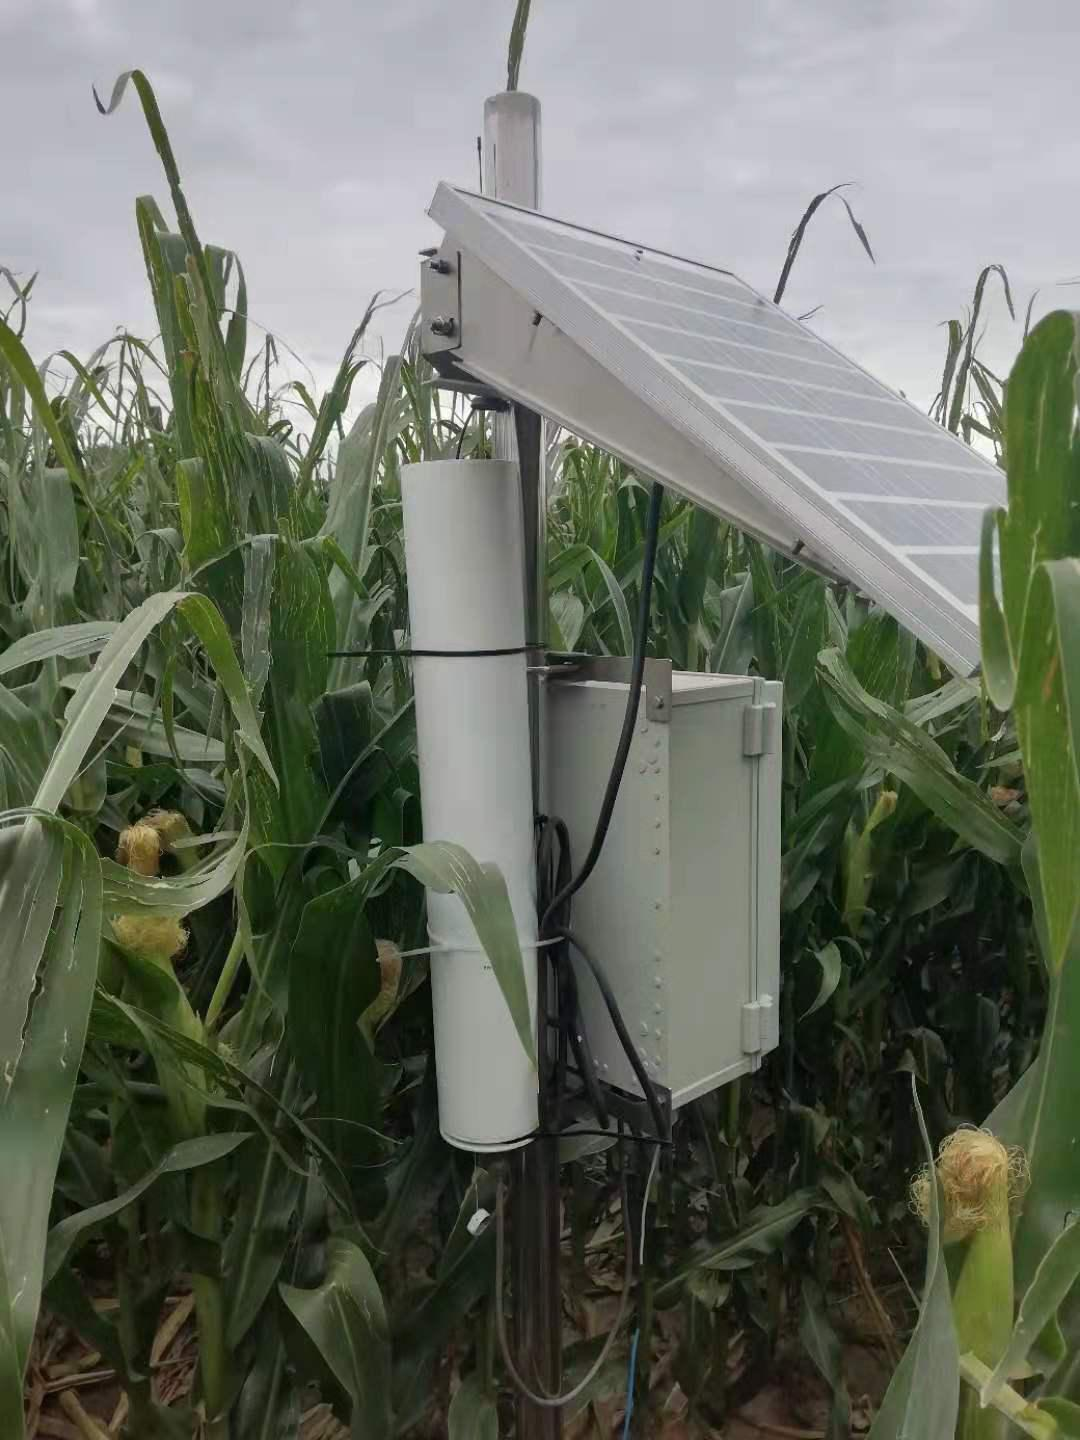 The development of devices monitoring ecosystem energy and water flux: Mesoscale soil moisture measurement system (2020)